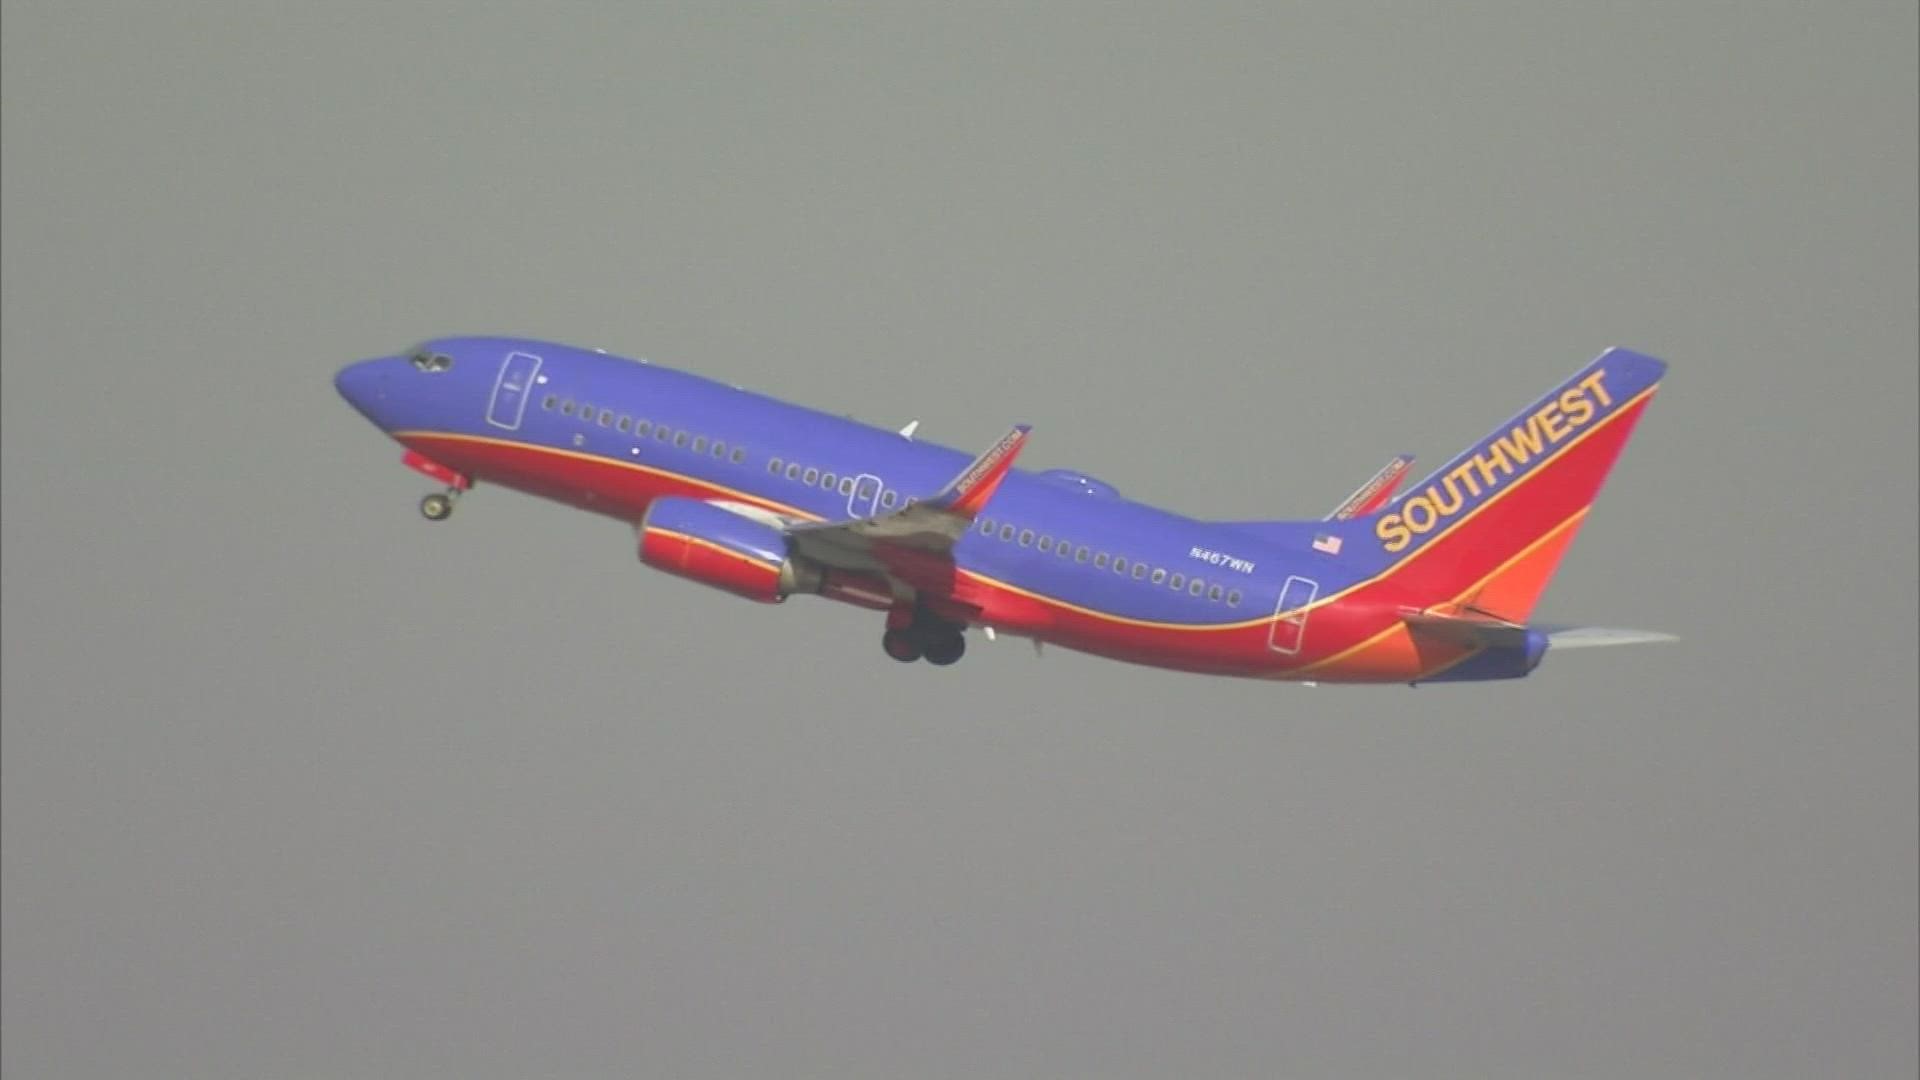 The low-cost airline said its cuts are likely to continue through the winter except for around the holidays.